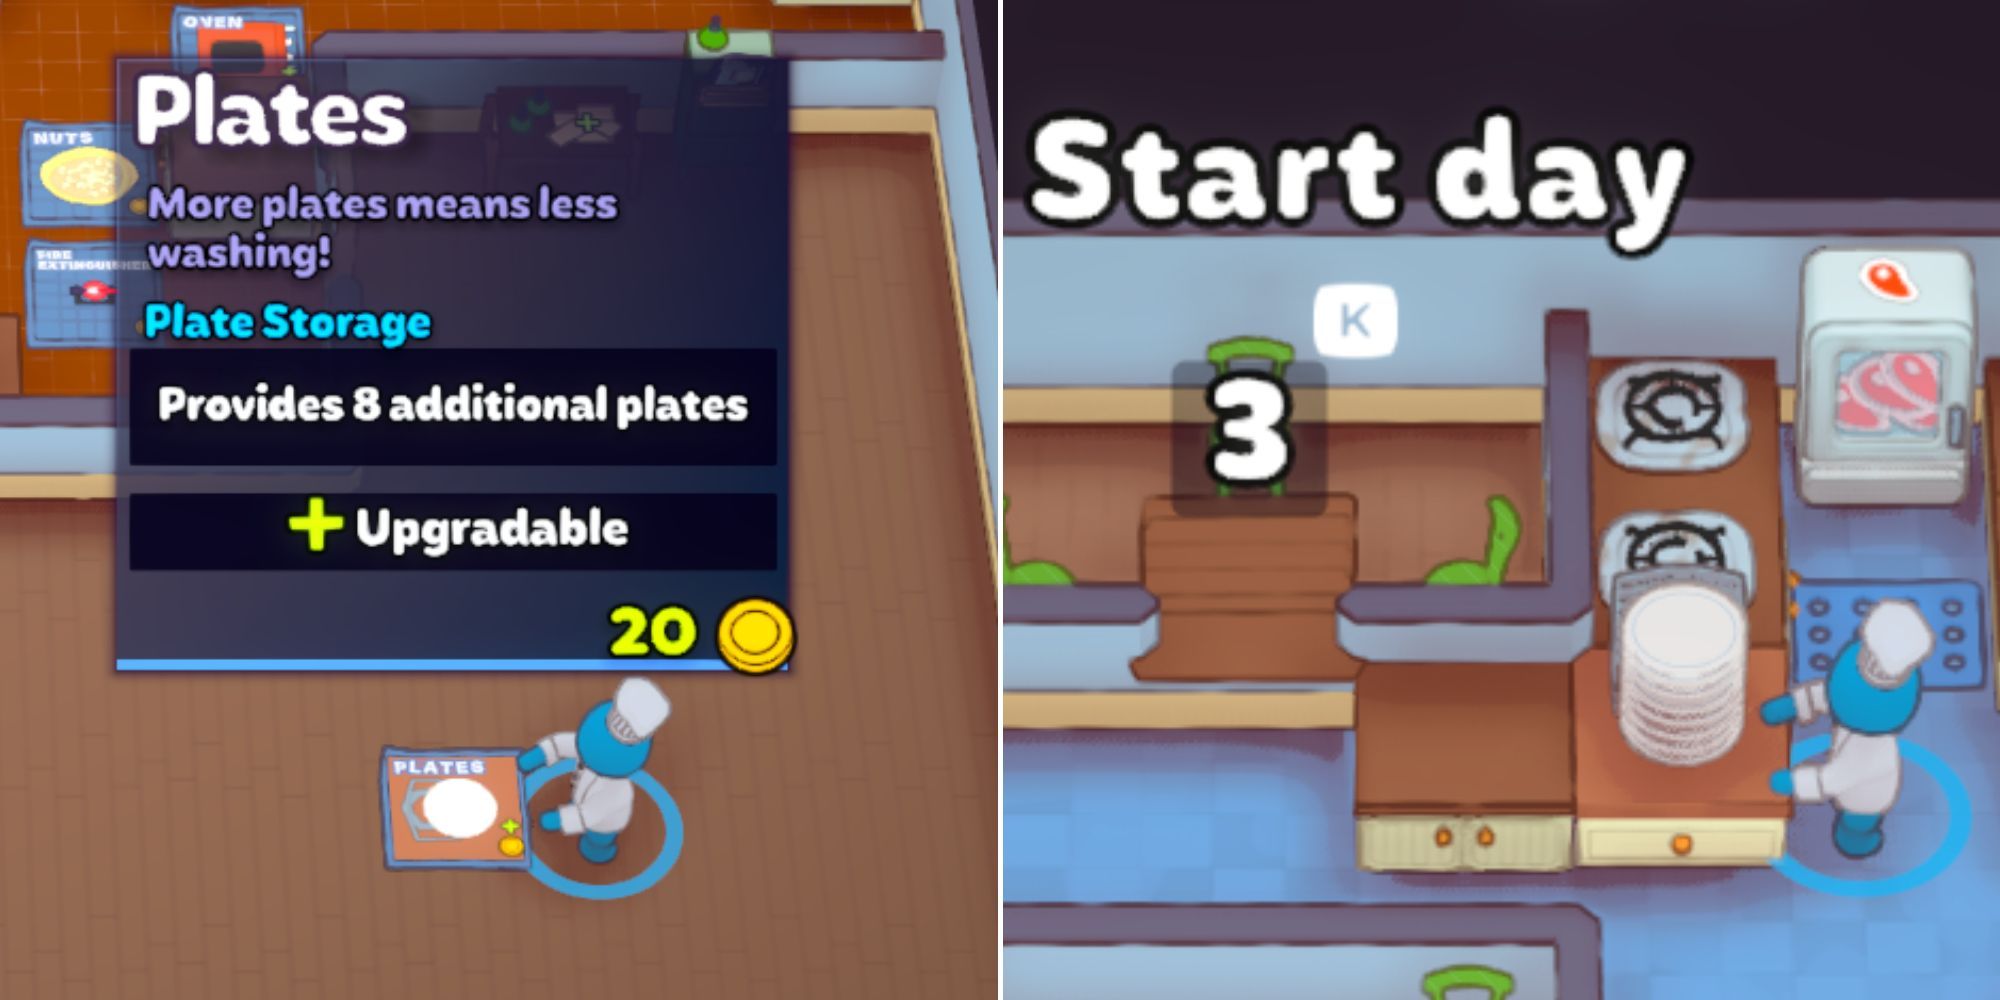 The details for the Plates Blueprint and a player standing next to the plate stack in PlateUp